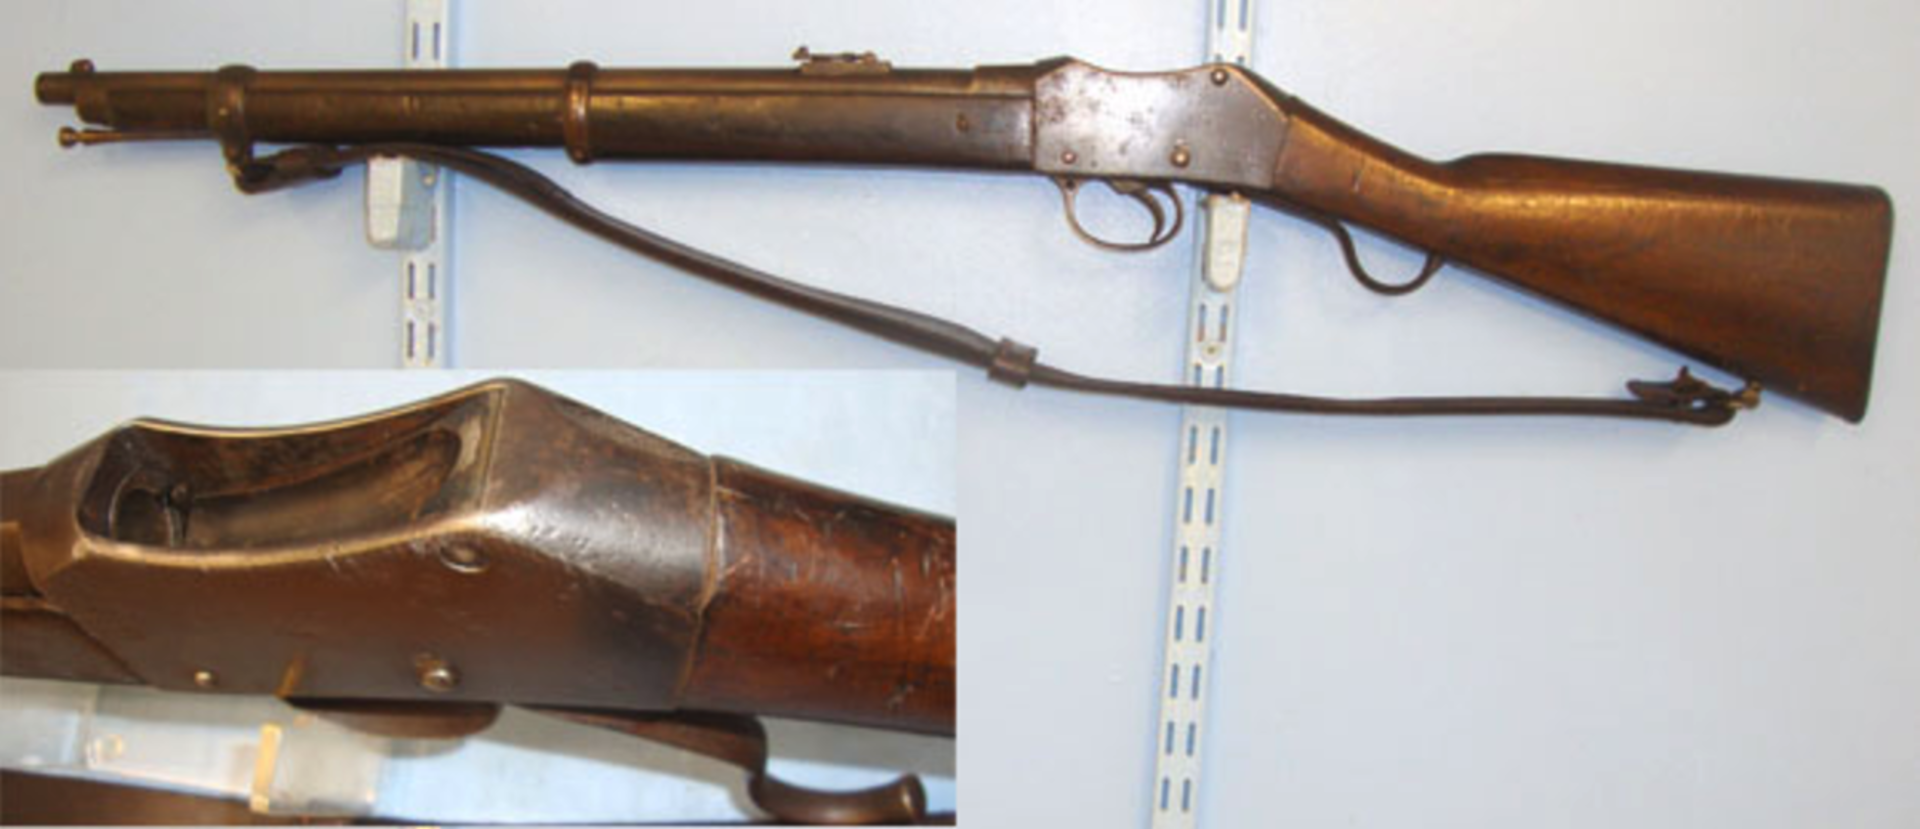 1885 & 1894 Dated MK II Enfield Martini Henry 577x450 Calibre Artillery Carbine - Image 2 of 3